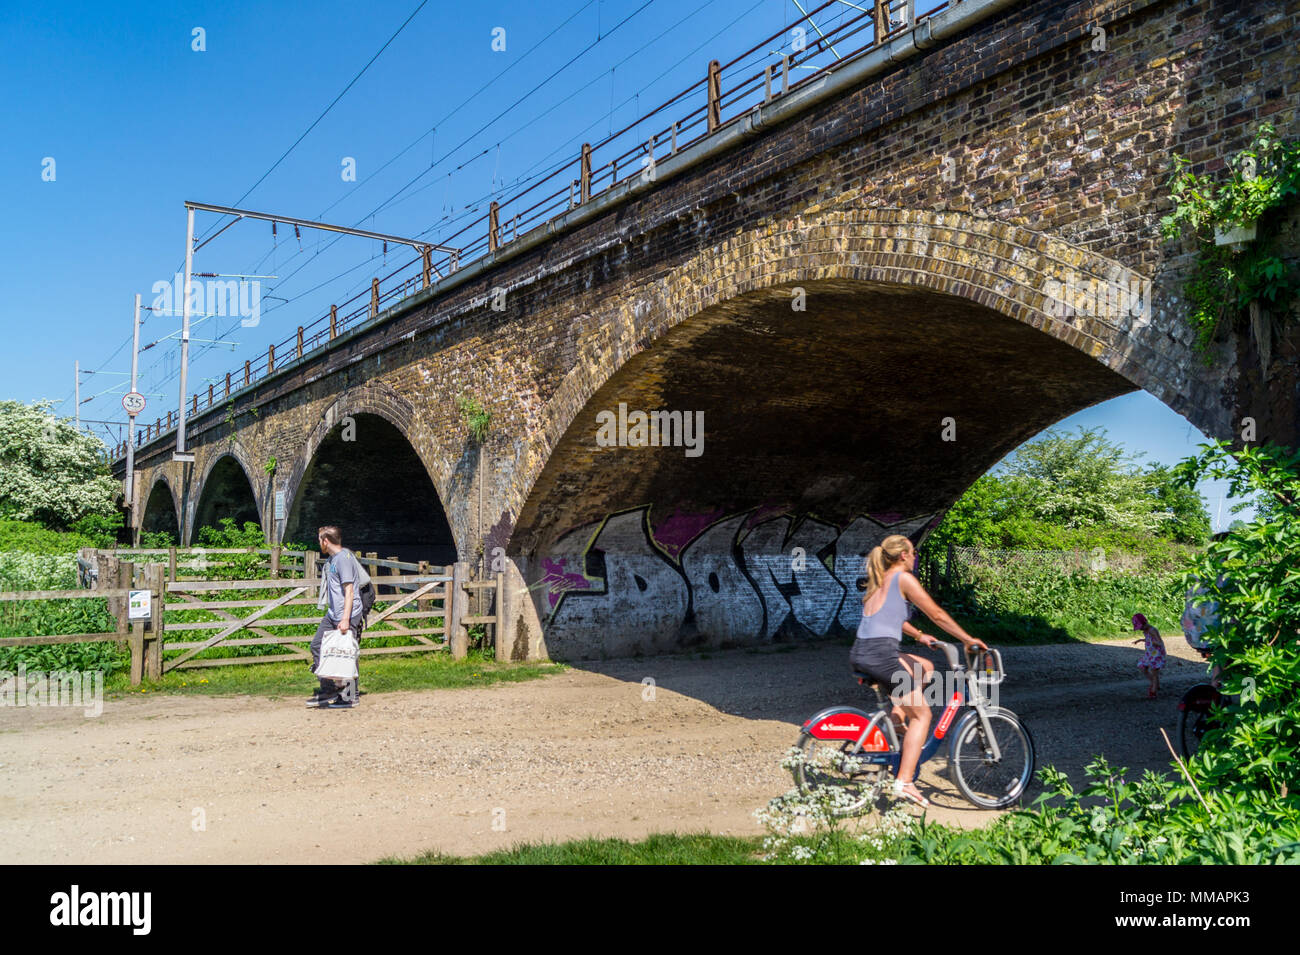 Railway arches used by A.V. Roe to assemble the Roe 1 triplane, first British aeroplane, in 1909, Walthamstow Marshes, London England Stock Photo